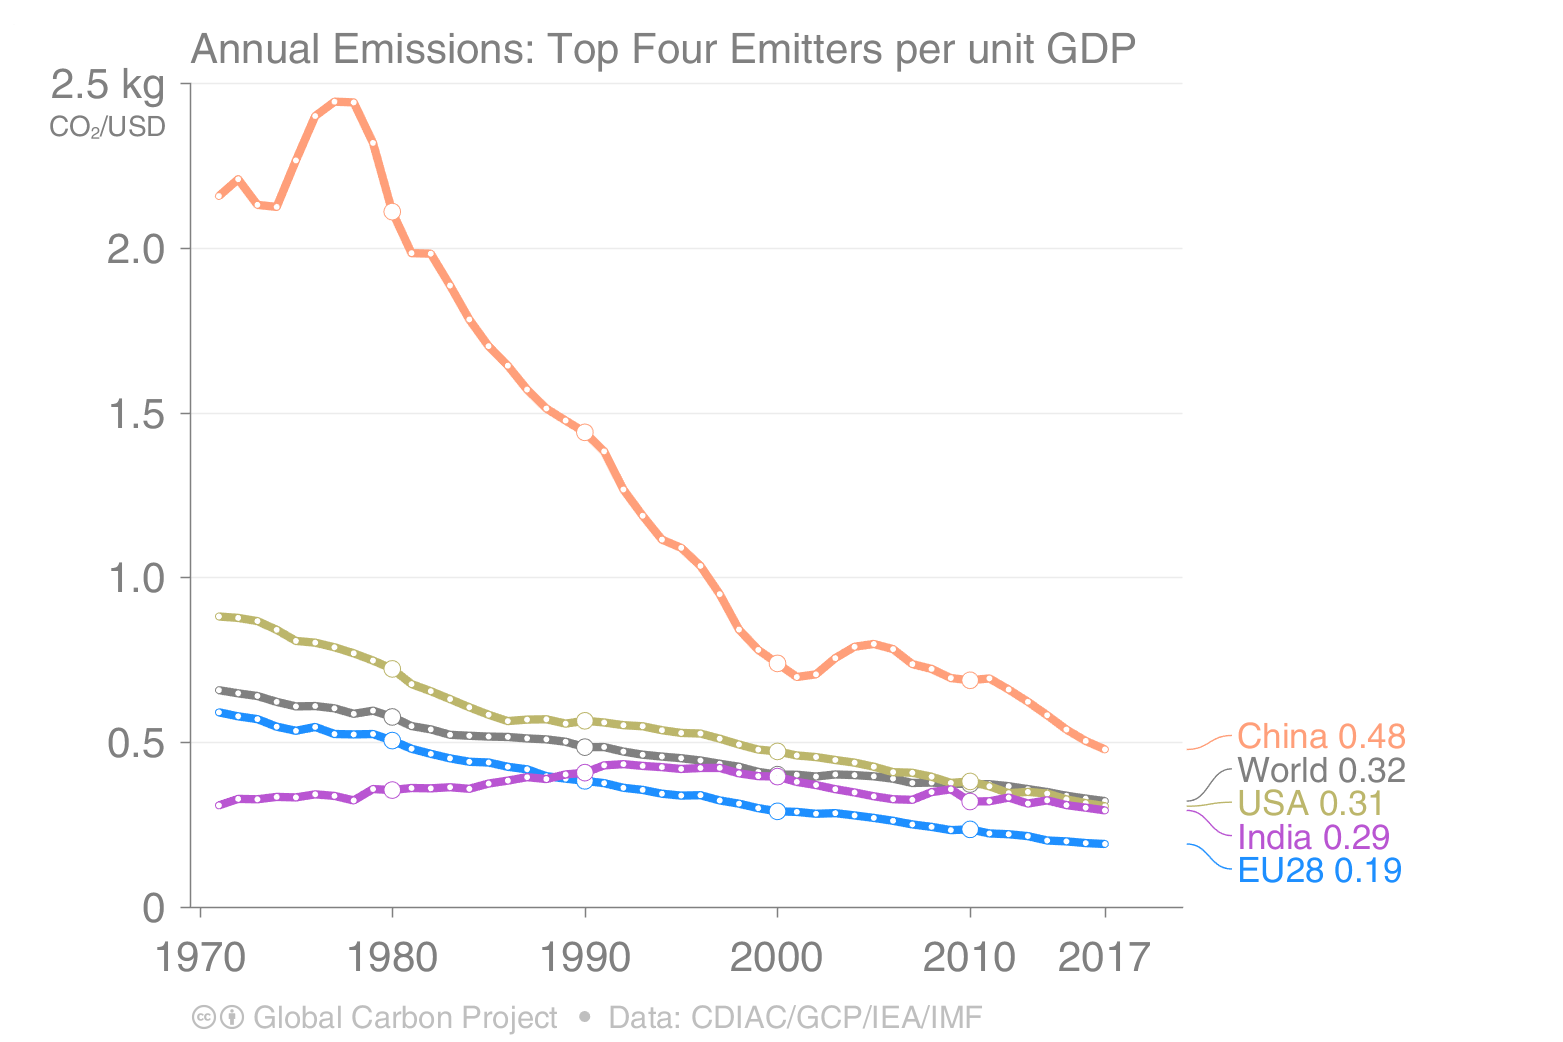 Annual CO2 emissions: top four emitters per unit GDP